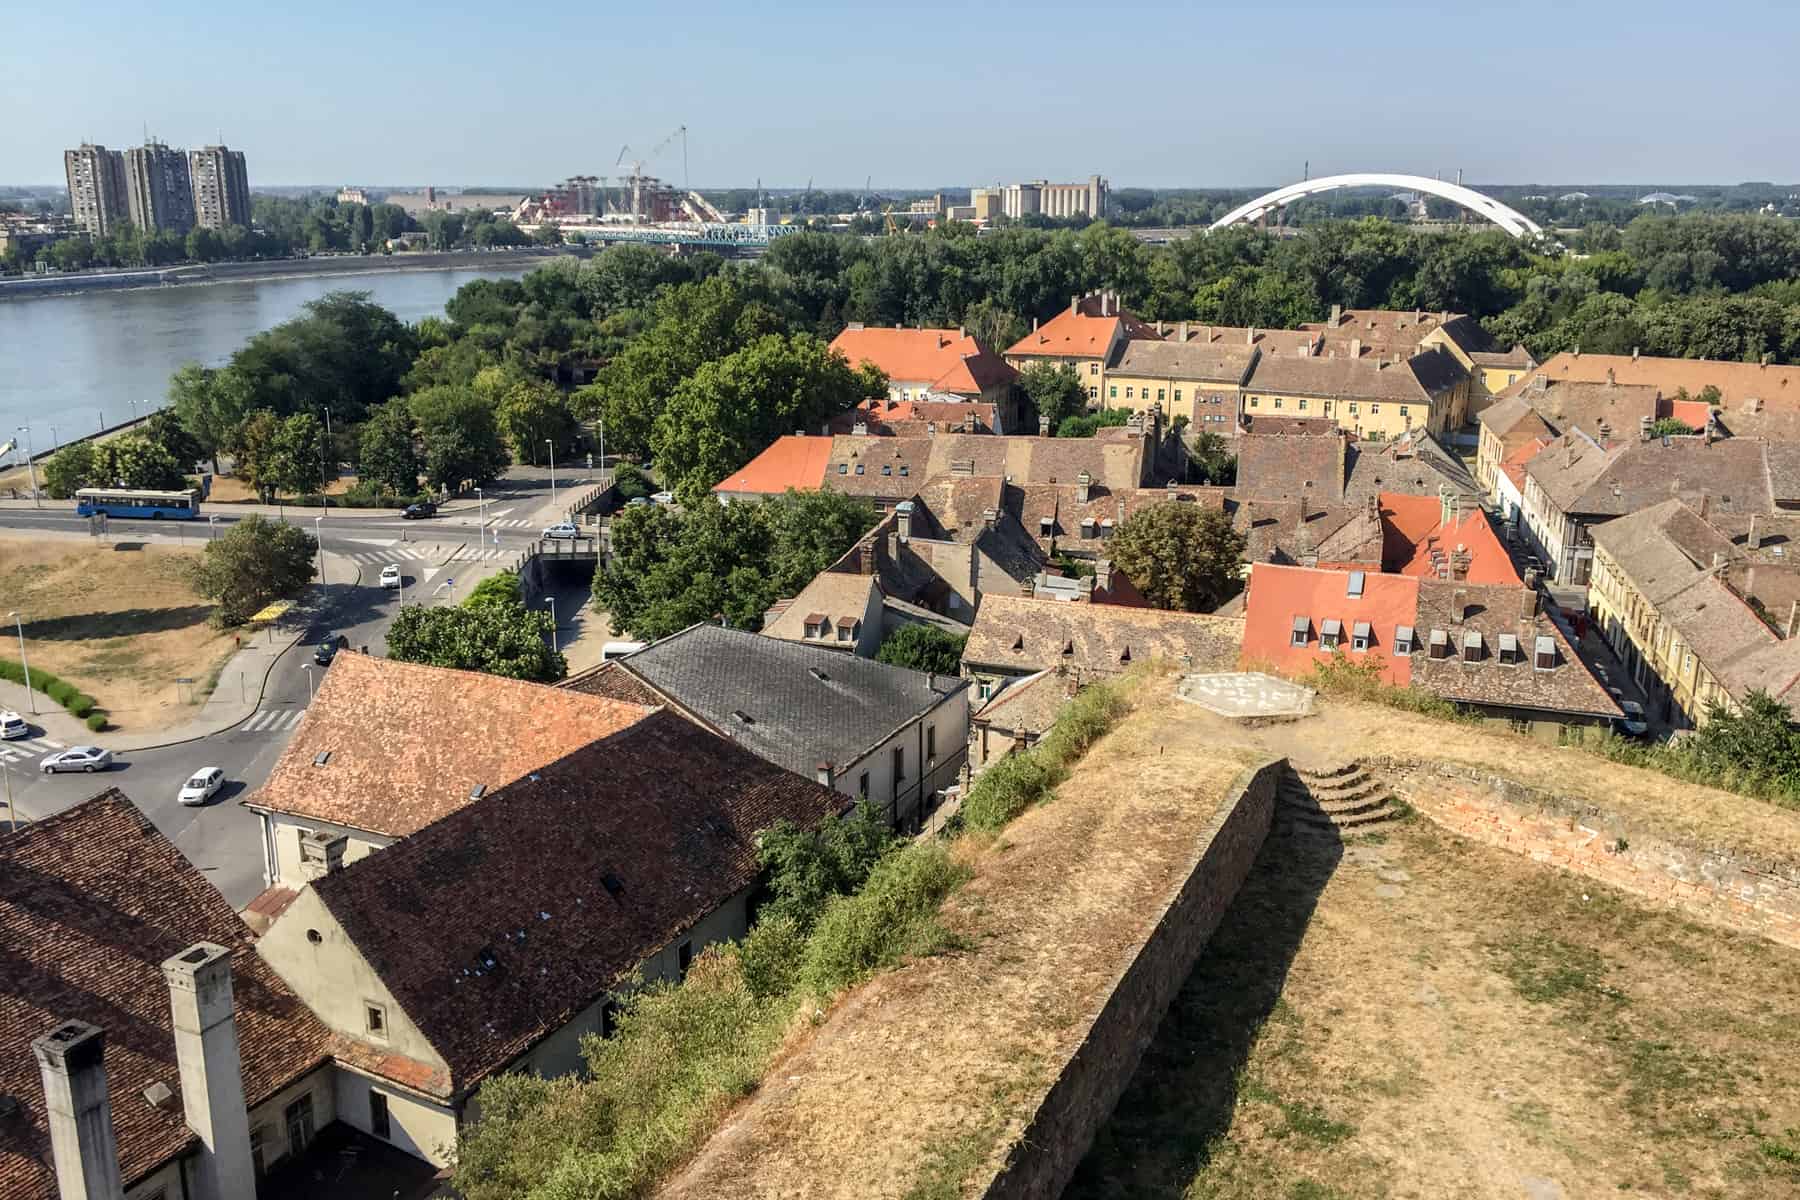 Elevated view from the corner stone of a Fortress in Novi Sad, overlooking a group of brown and orange roof houses, the river, a white arch and skyscrapers in the distance. 